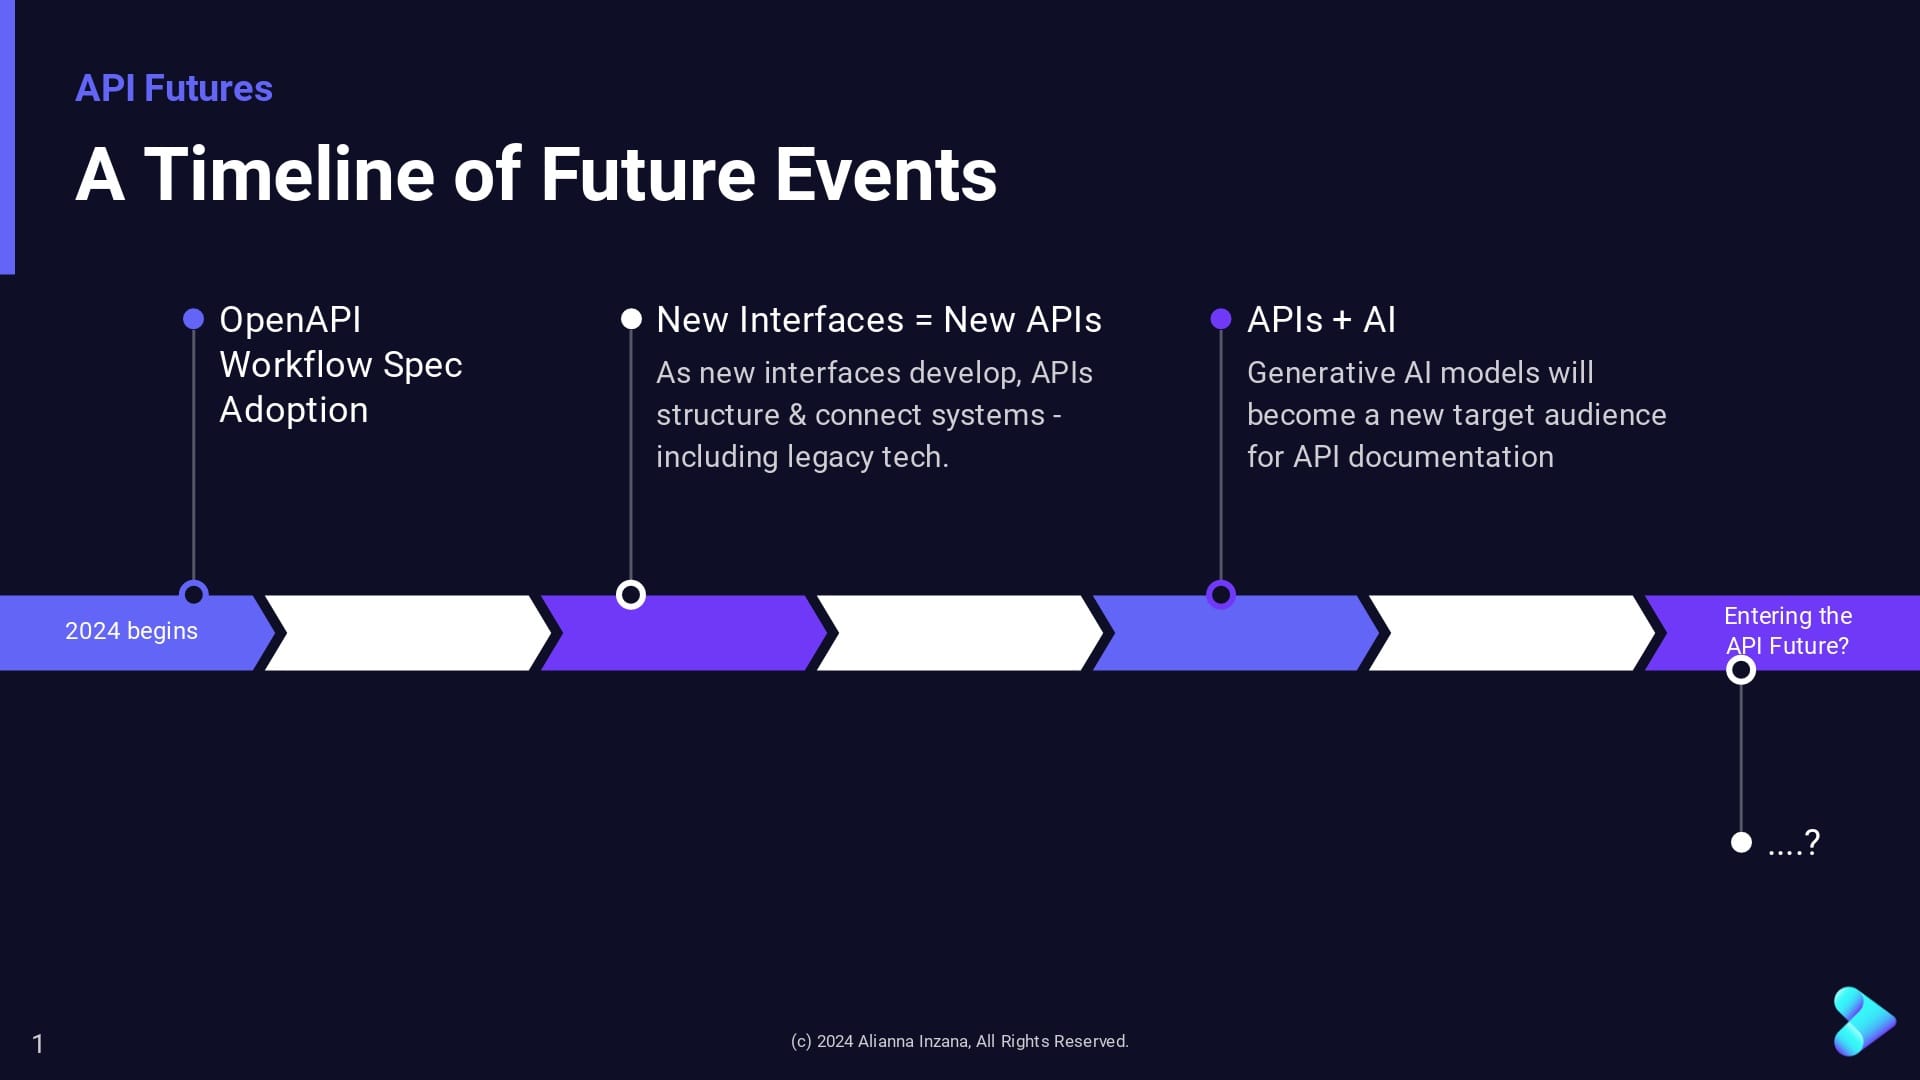 A Timeline of Future Events in the API space